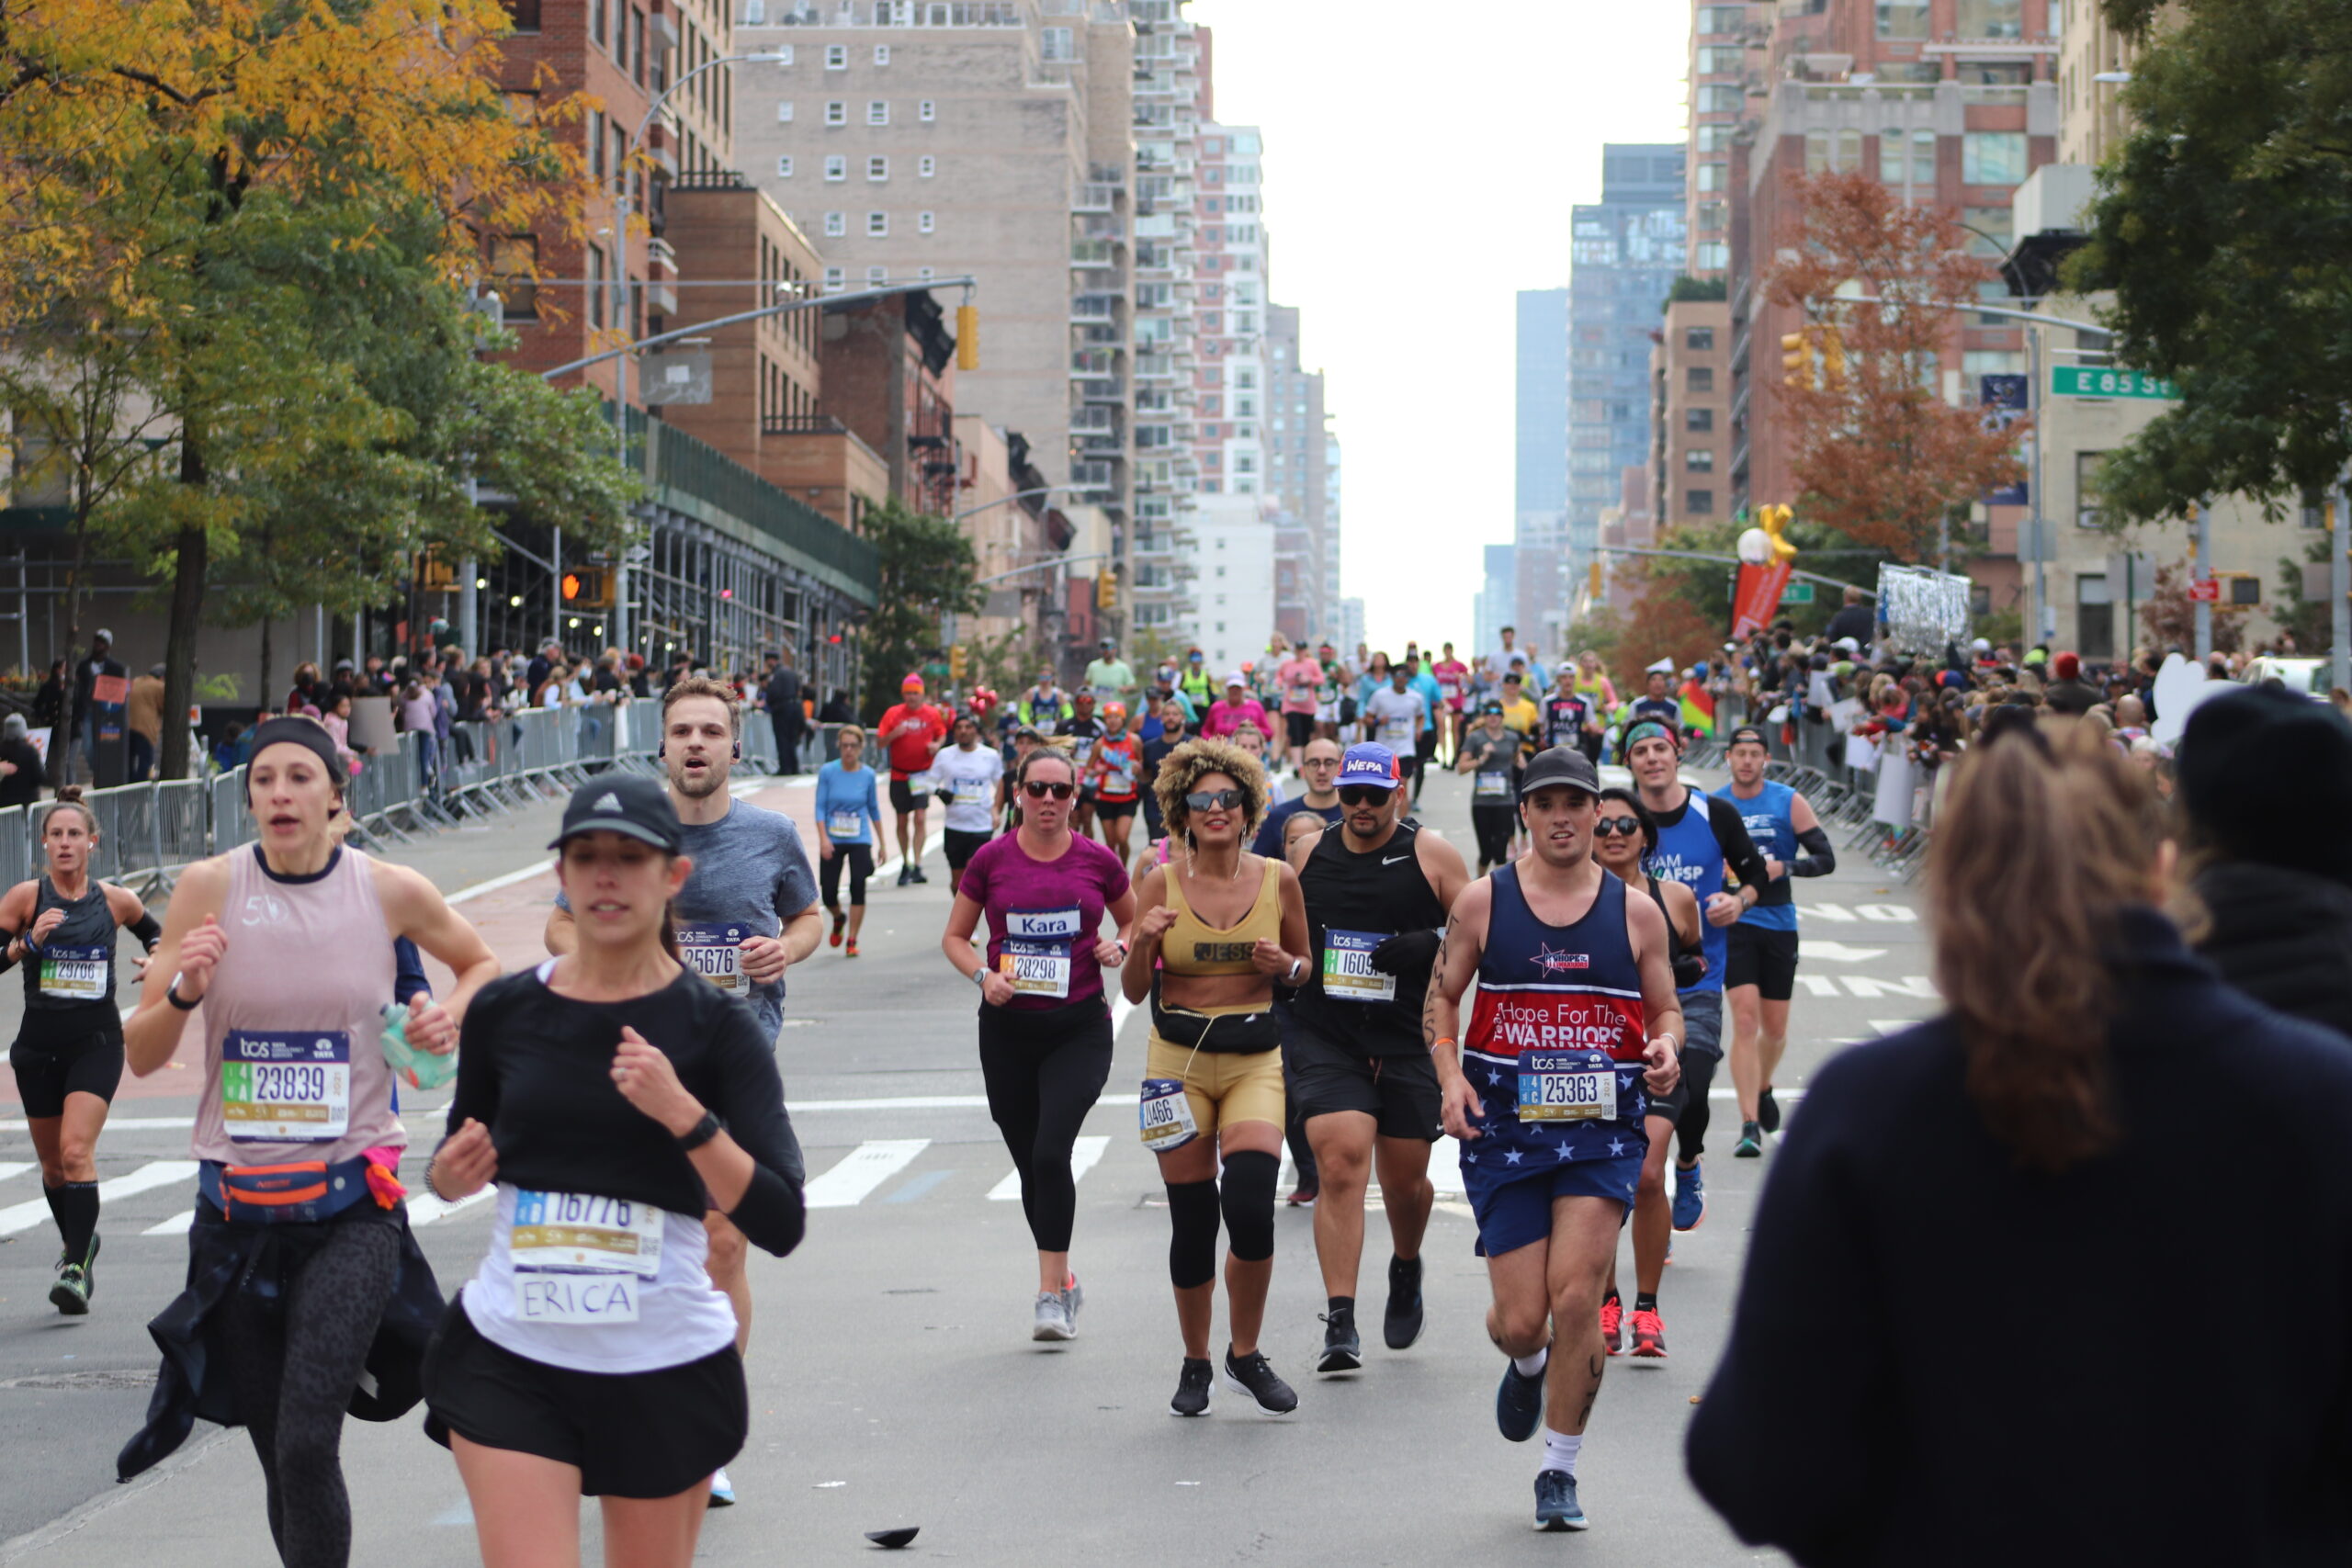 Runners on 1st Avenue in Manhattan during the 2021 New York City marathon (Photo by Michael Dorgan, The Long Hall Podcast)